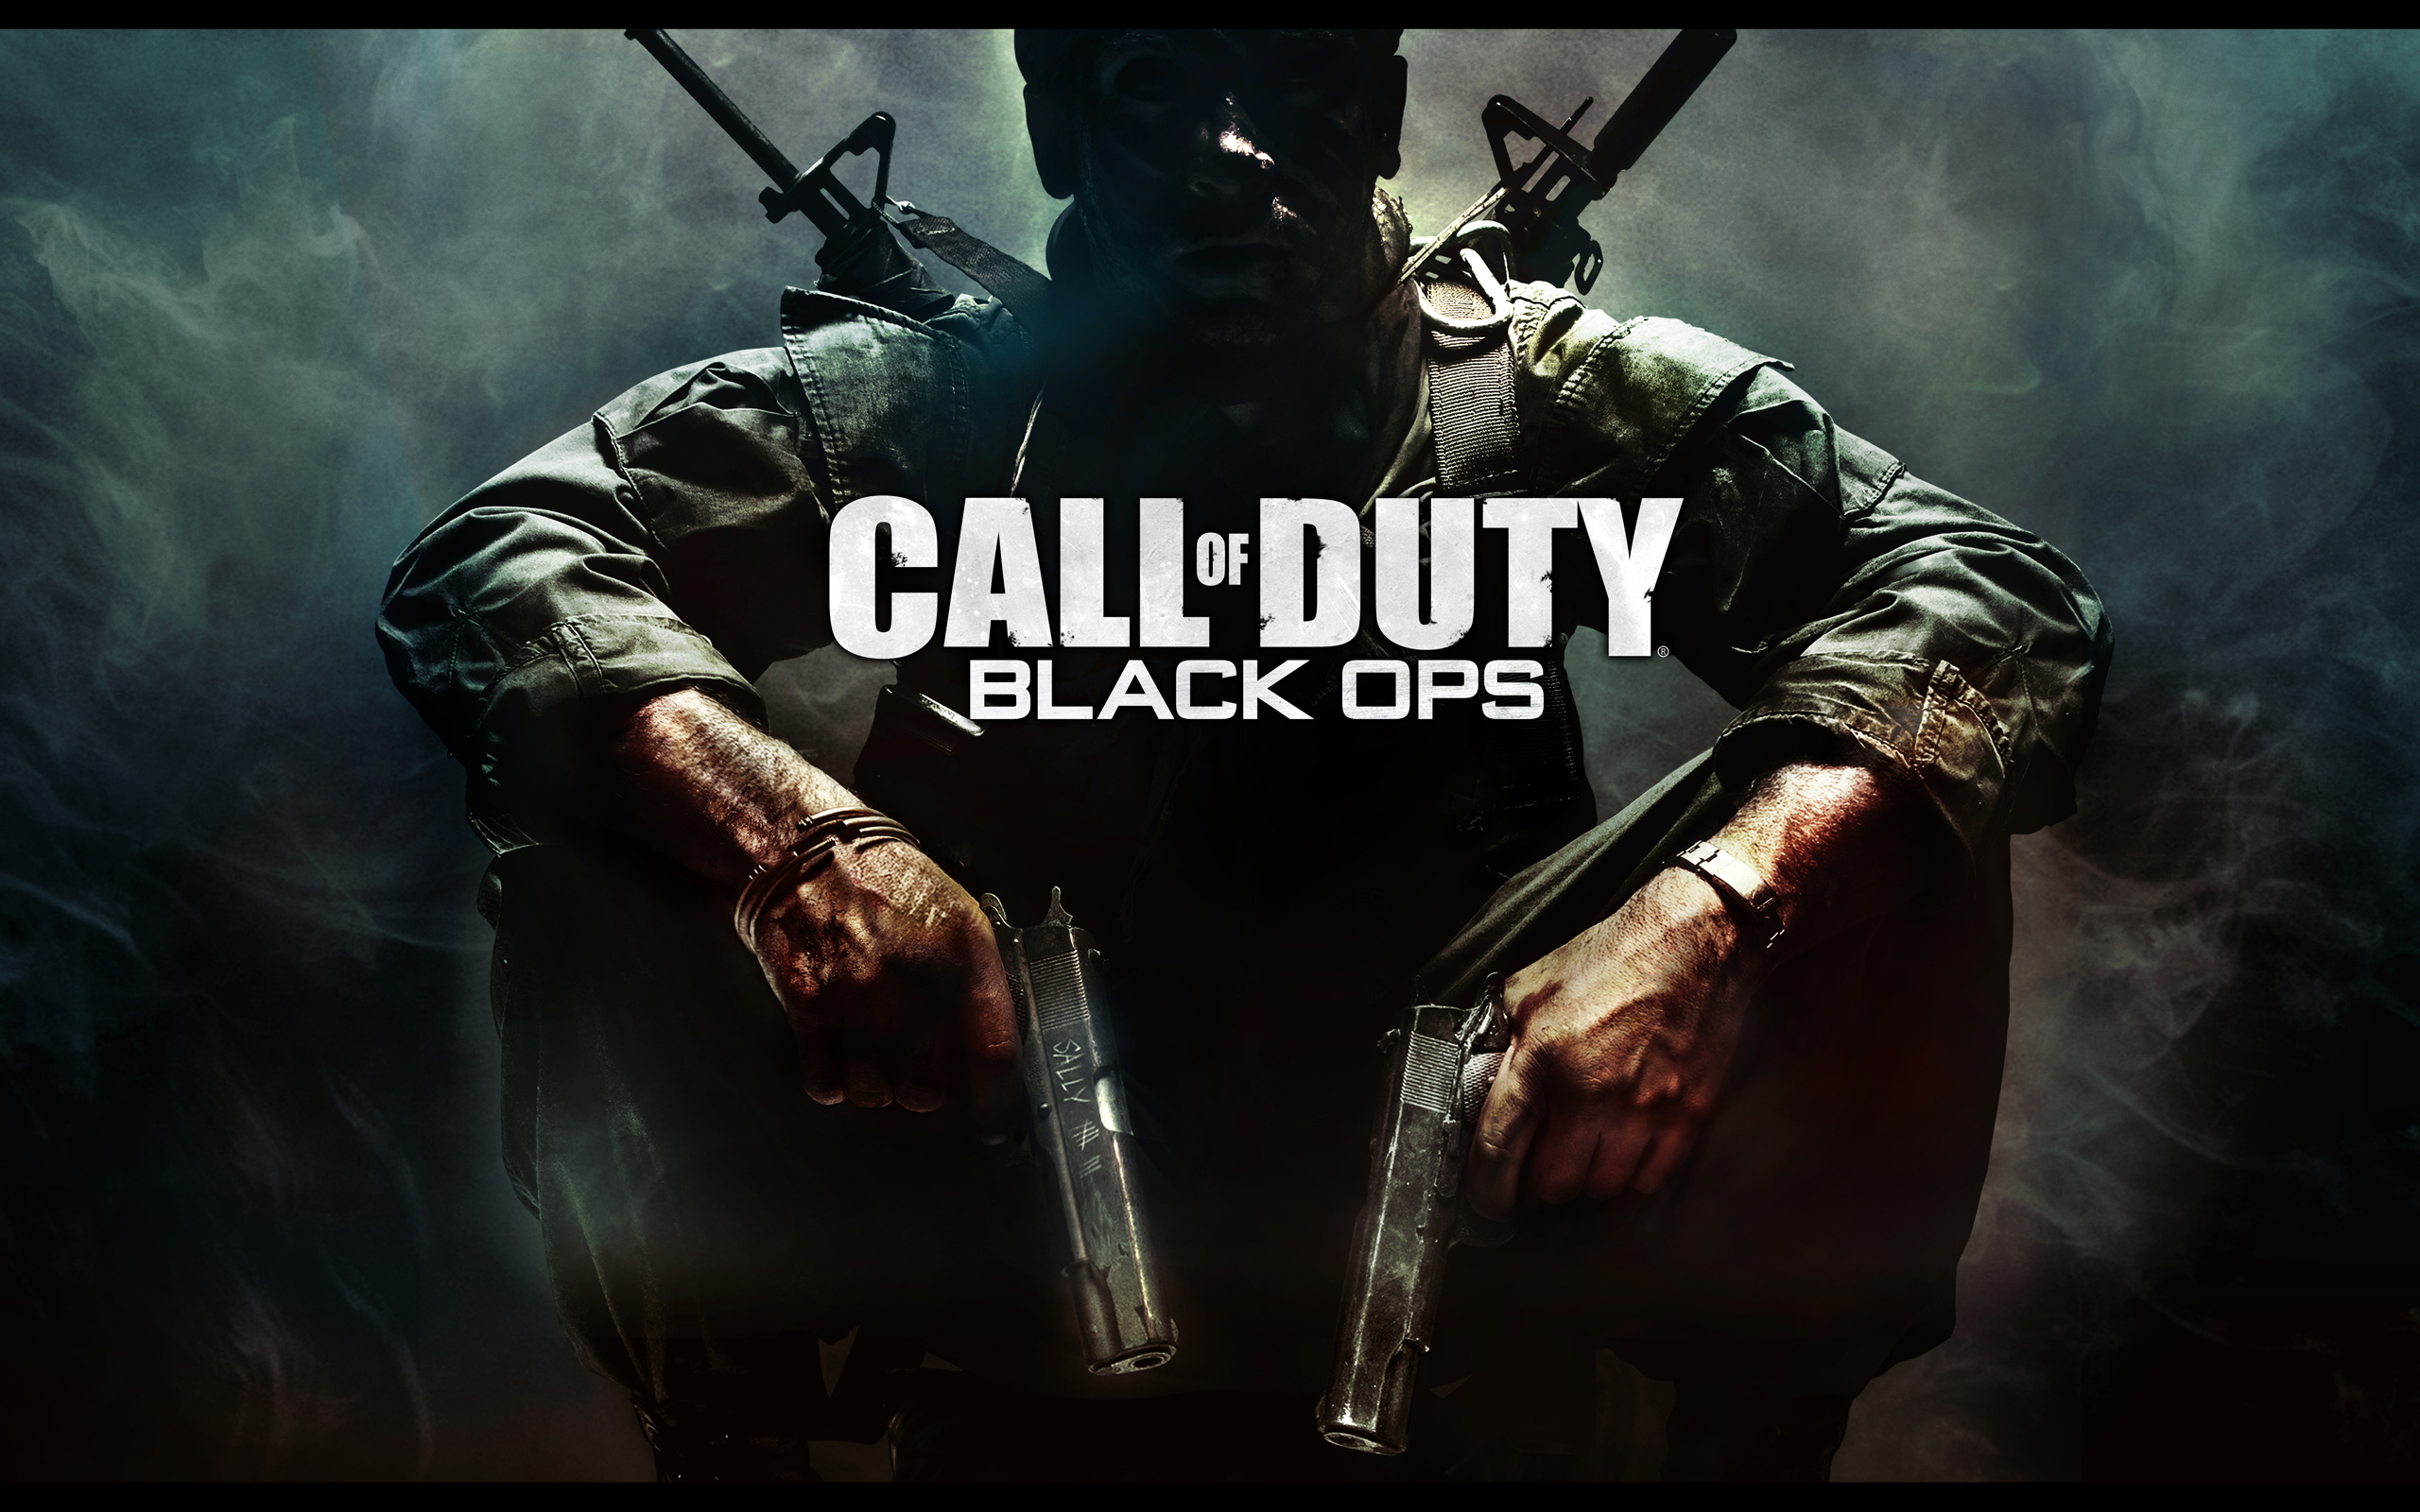 Call of Duty Black Ops  Cold War wallpapers or desktop backgrounds